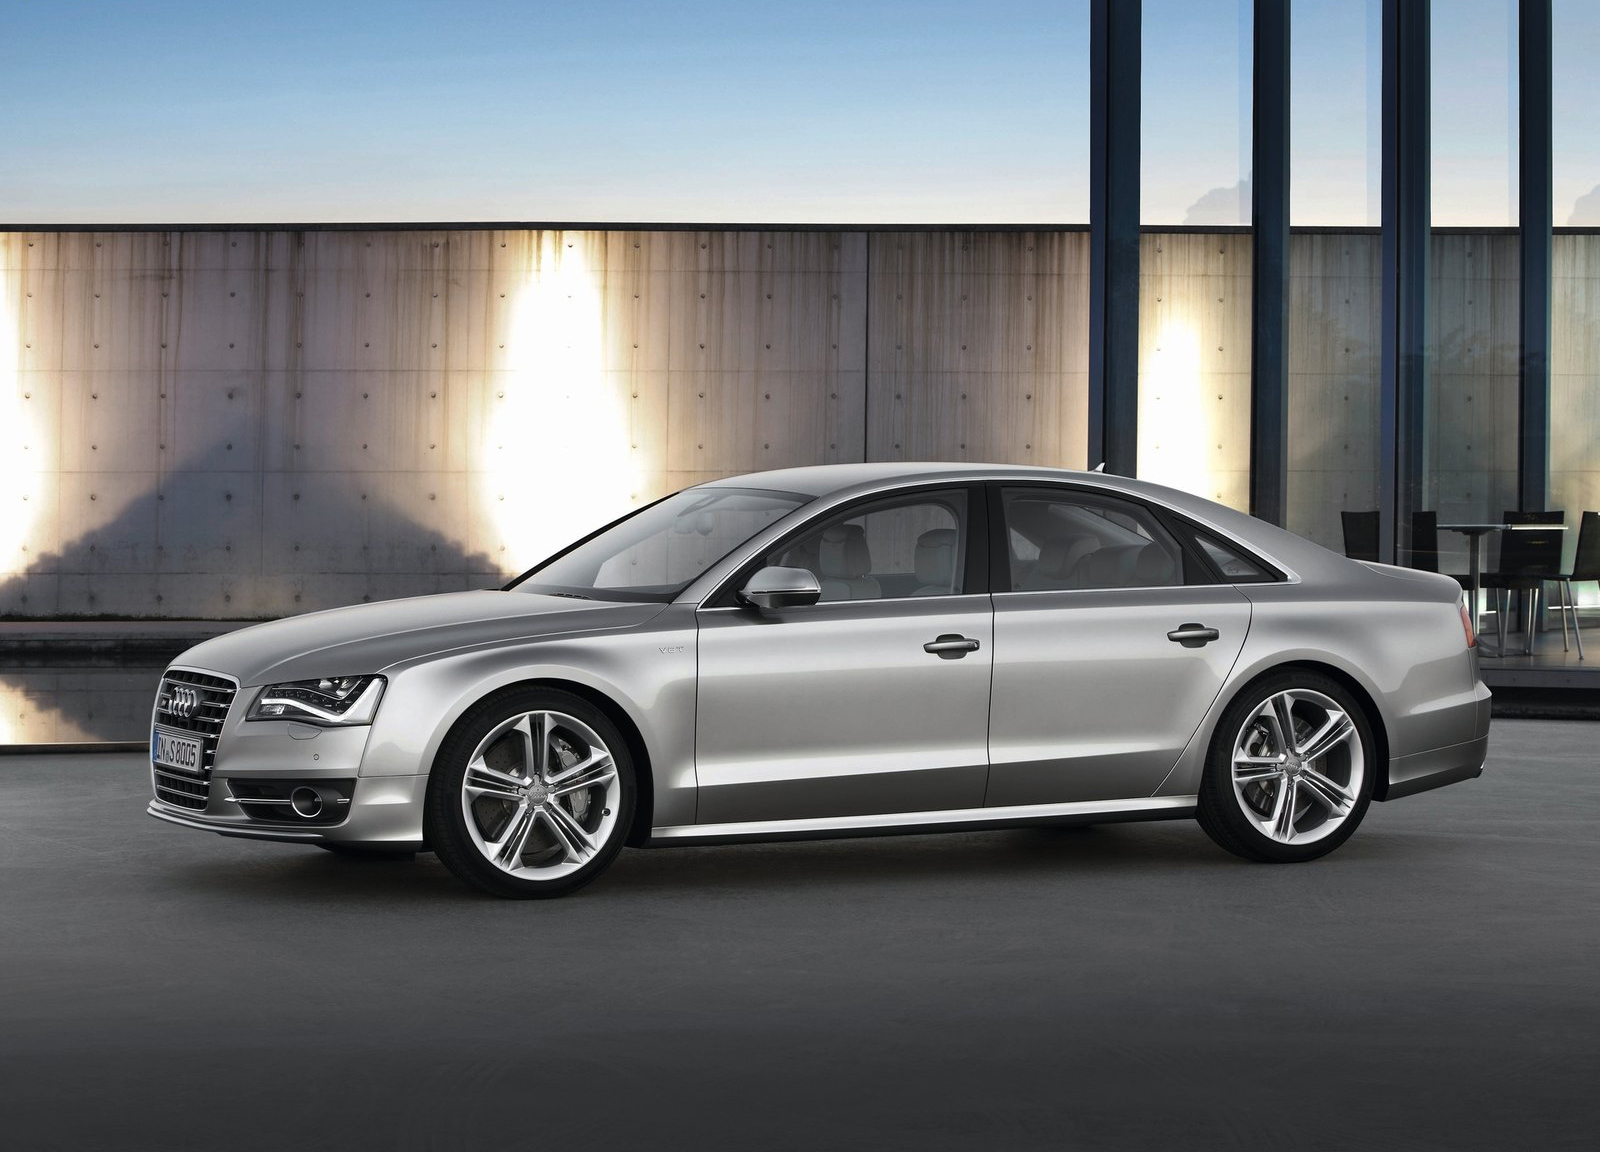 2012 / 2013 Audi S8 Wallpapers | The World of Audi